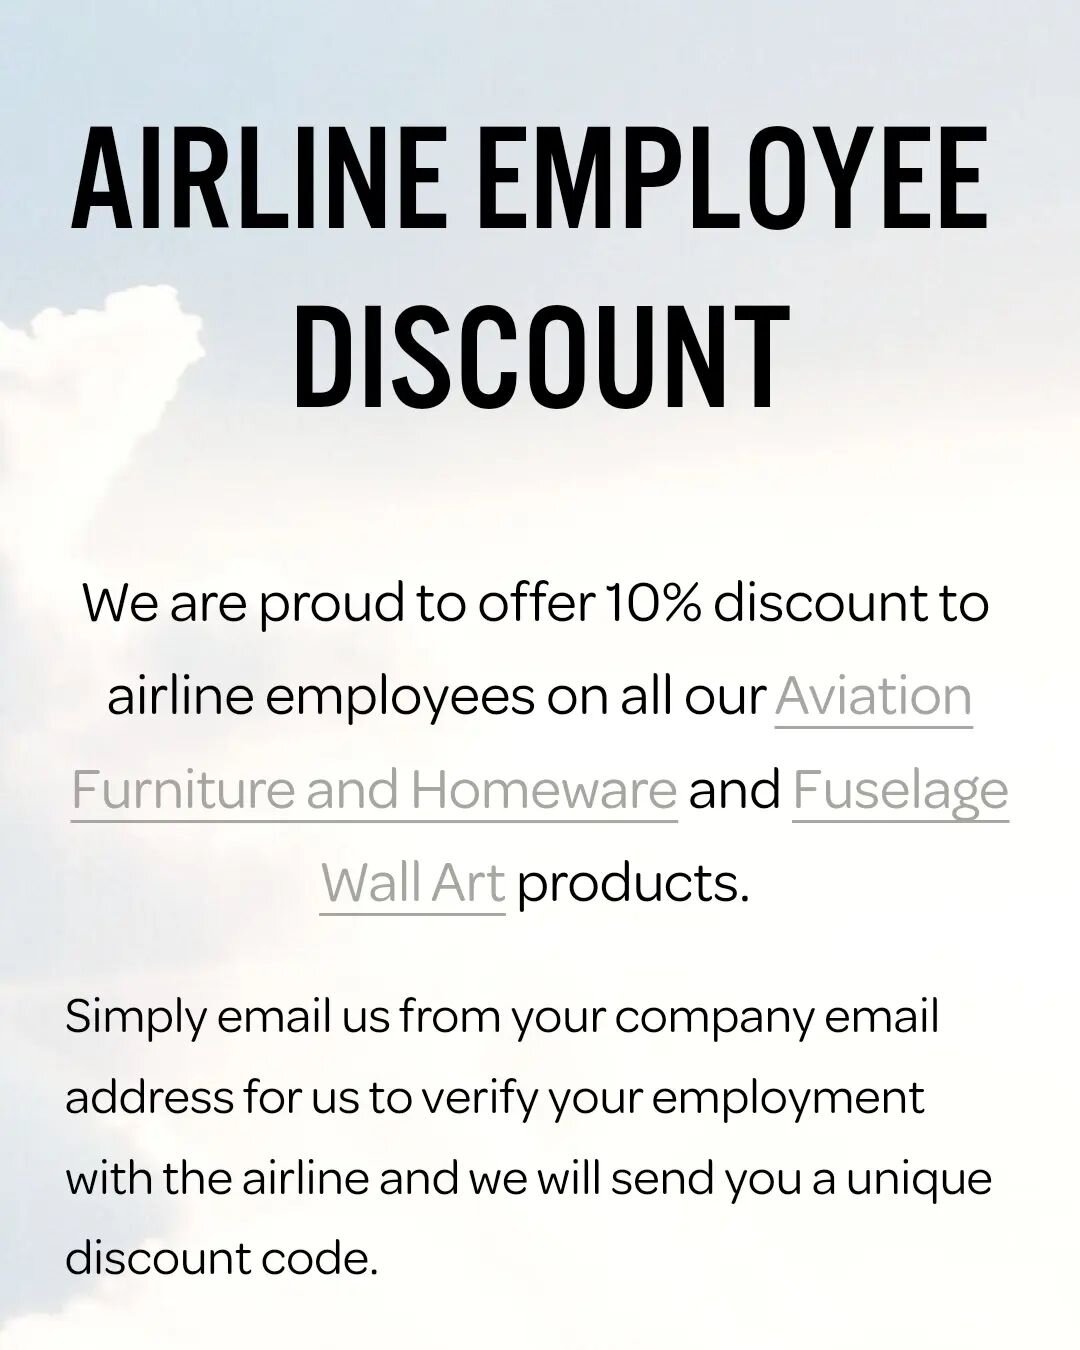 Airline employee discount available to all airline staff. Visit our website for further information.
#jet_set_lounge #airlinestaff #airlinediscount #aviation #aviationdaily #airplane #aviationfurniture #discount #pilot #pilotsofinstagram #airlinecrew